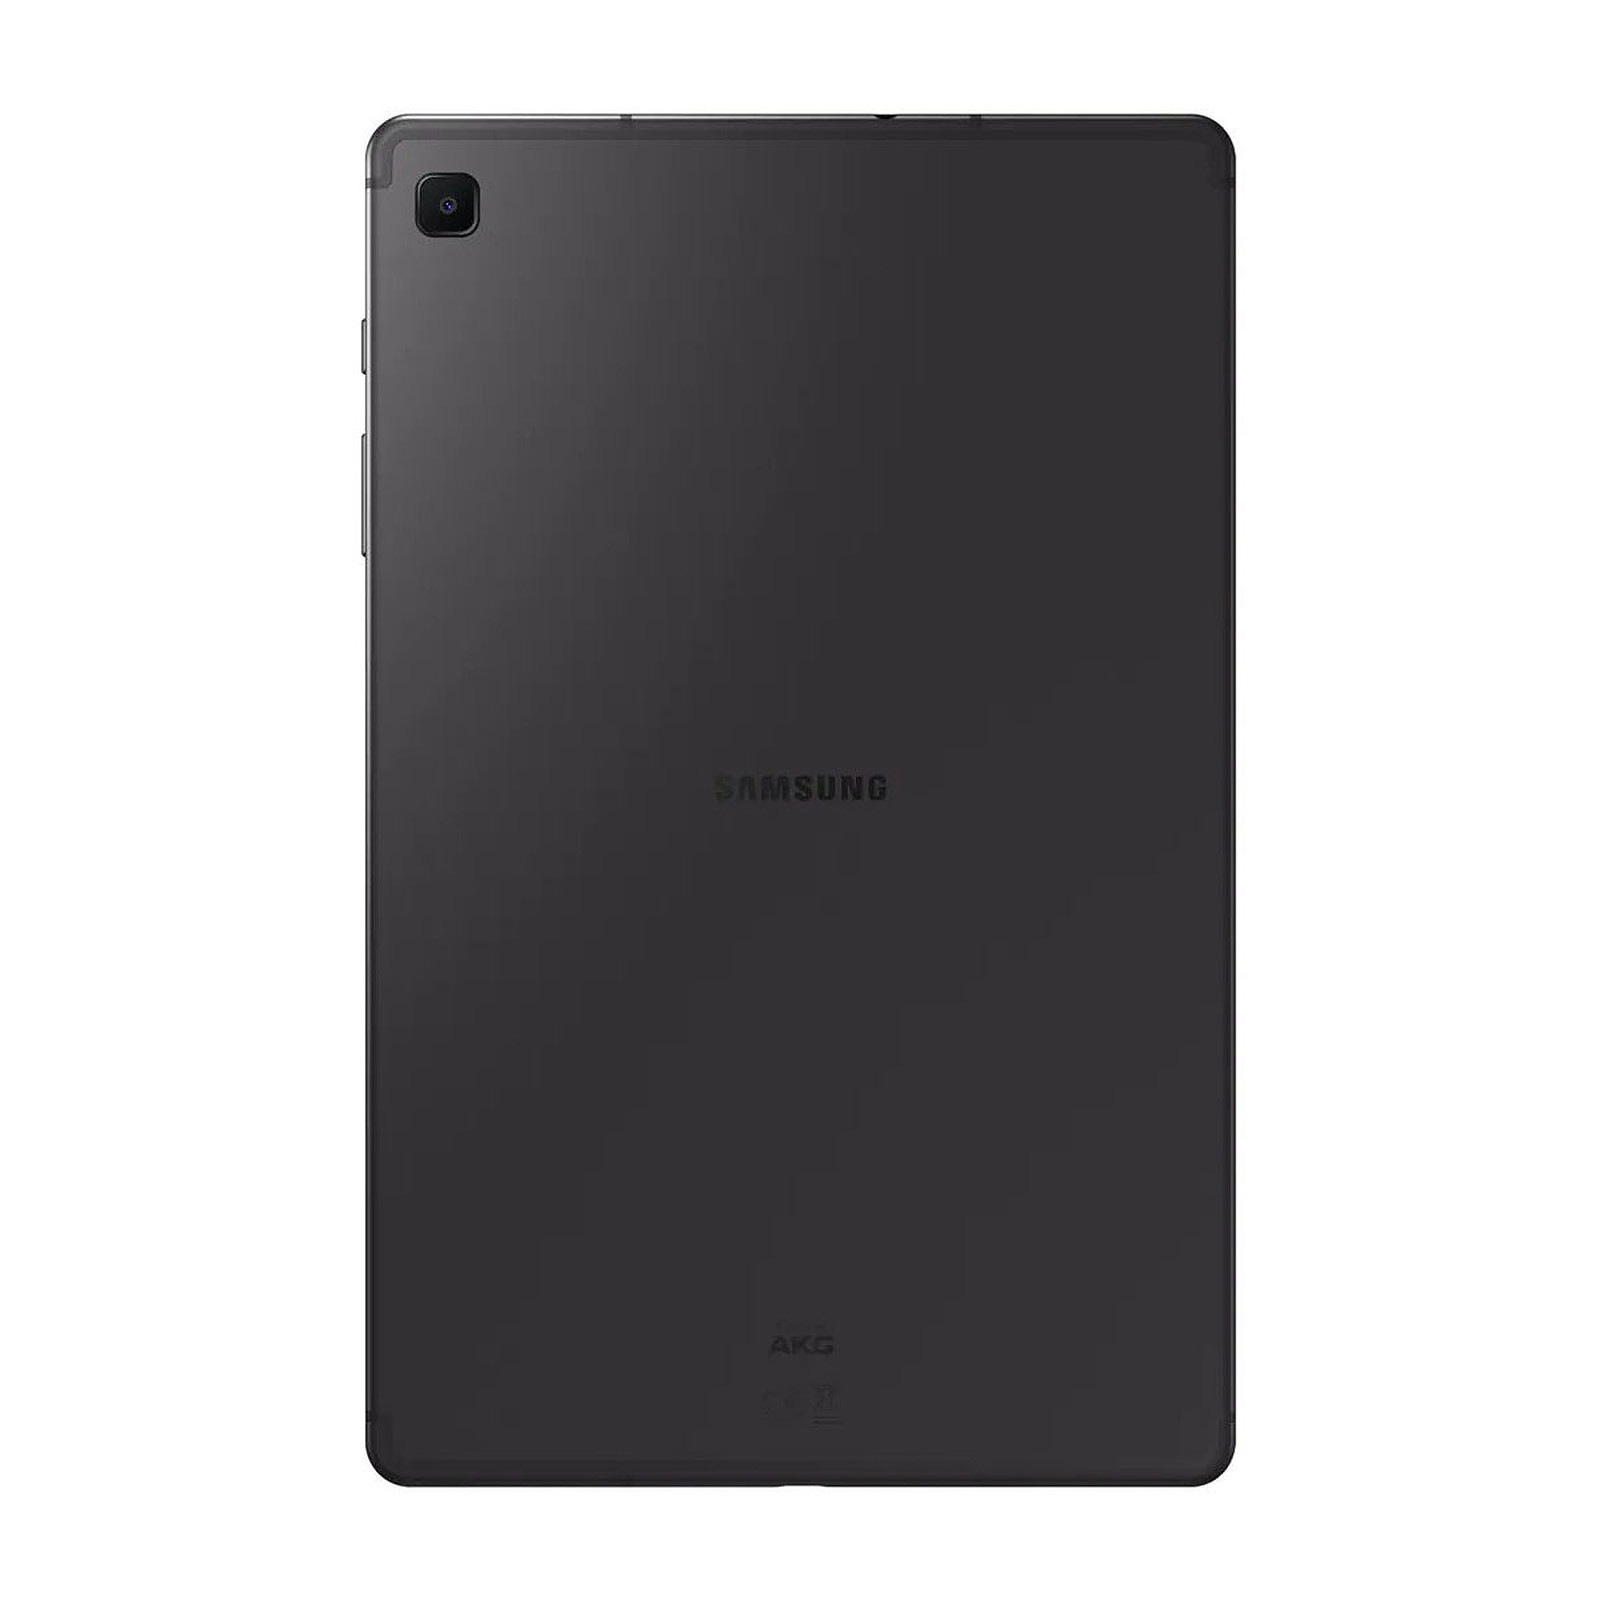 SAMSUNG Tablette tactile Galaxy Tab S6 Lite WiFi 64Go Argent - SM-P610NZAAXEF